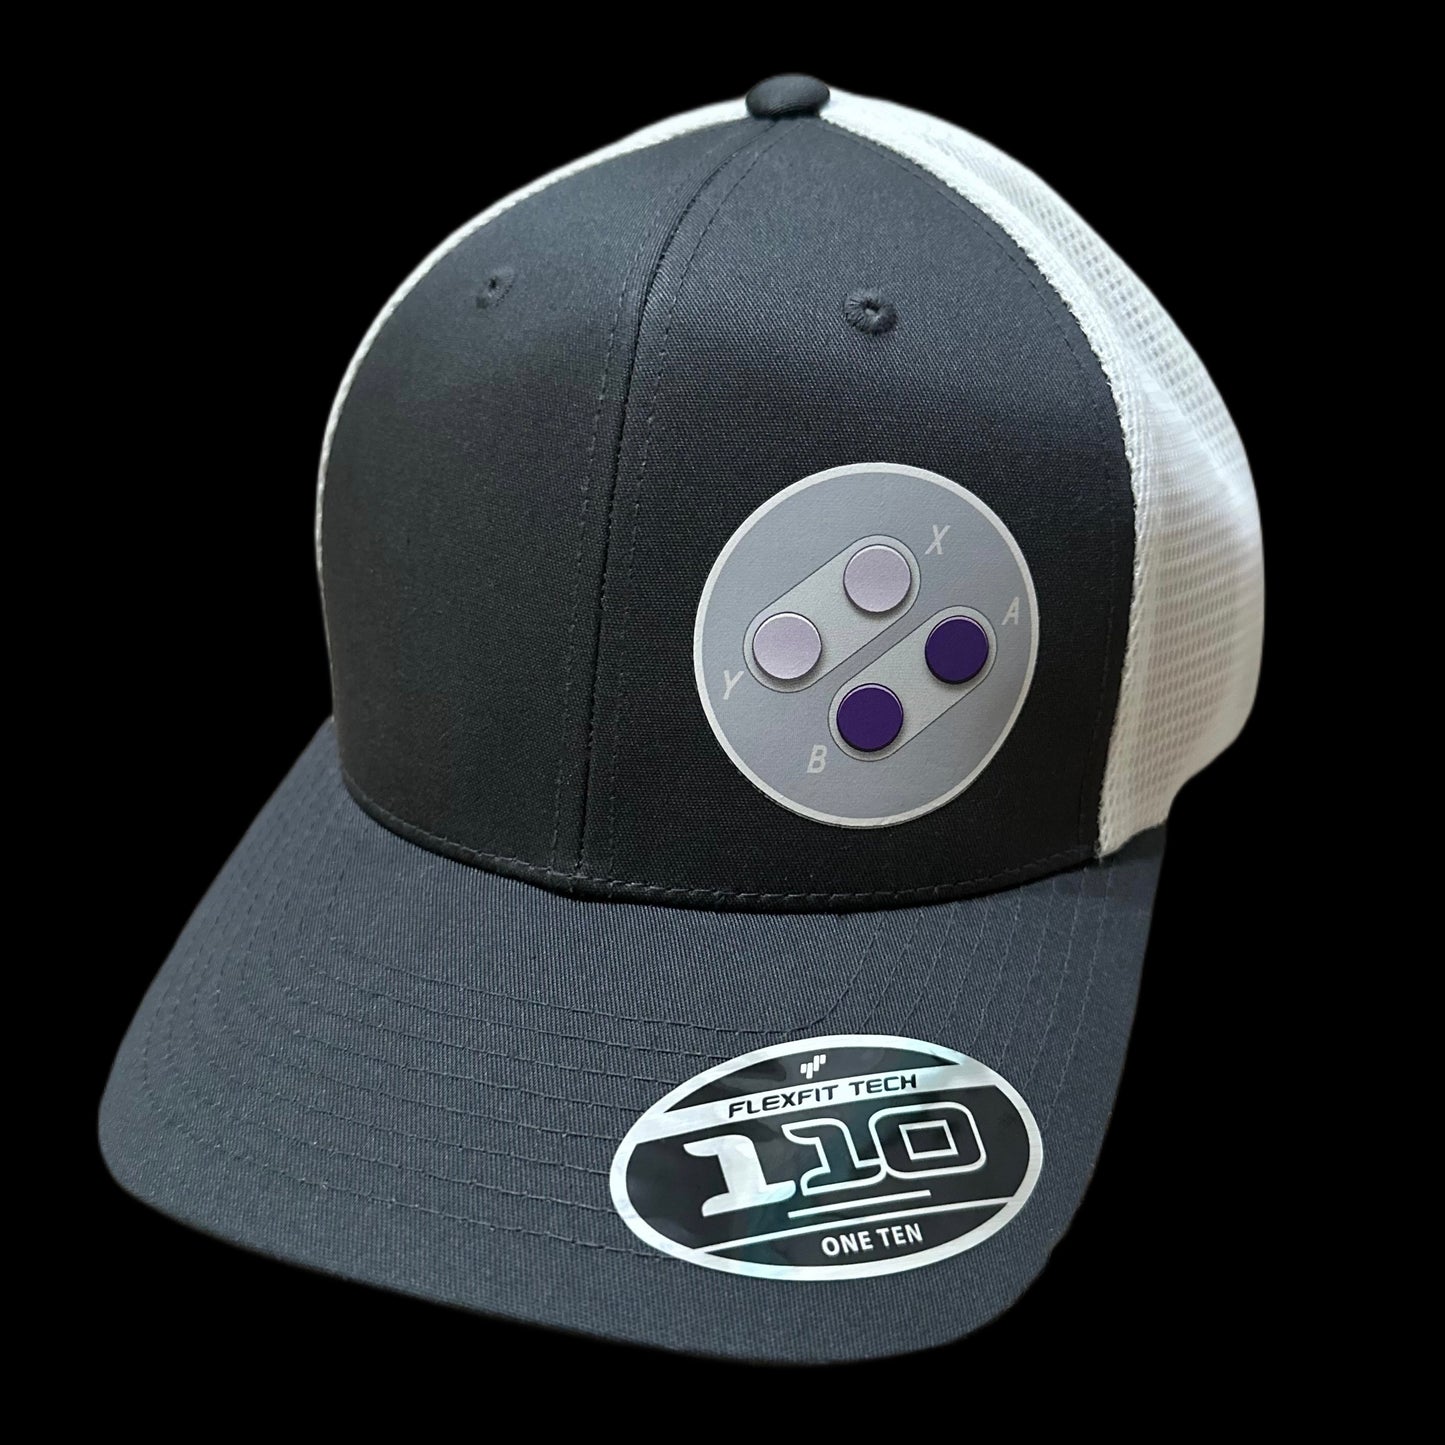 SNES or SFC Gaming Trucker Hat